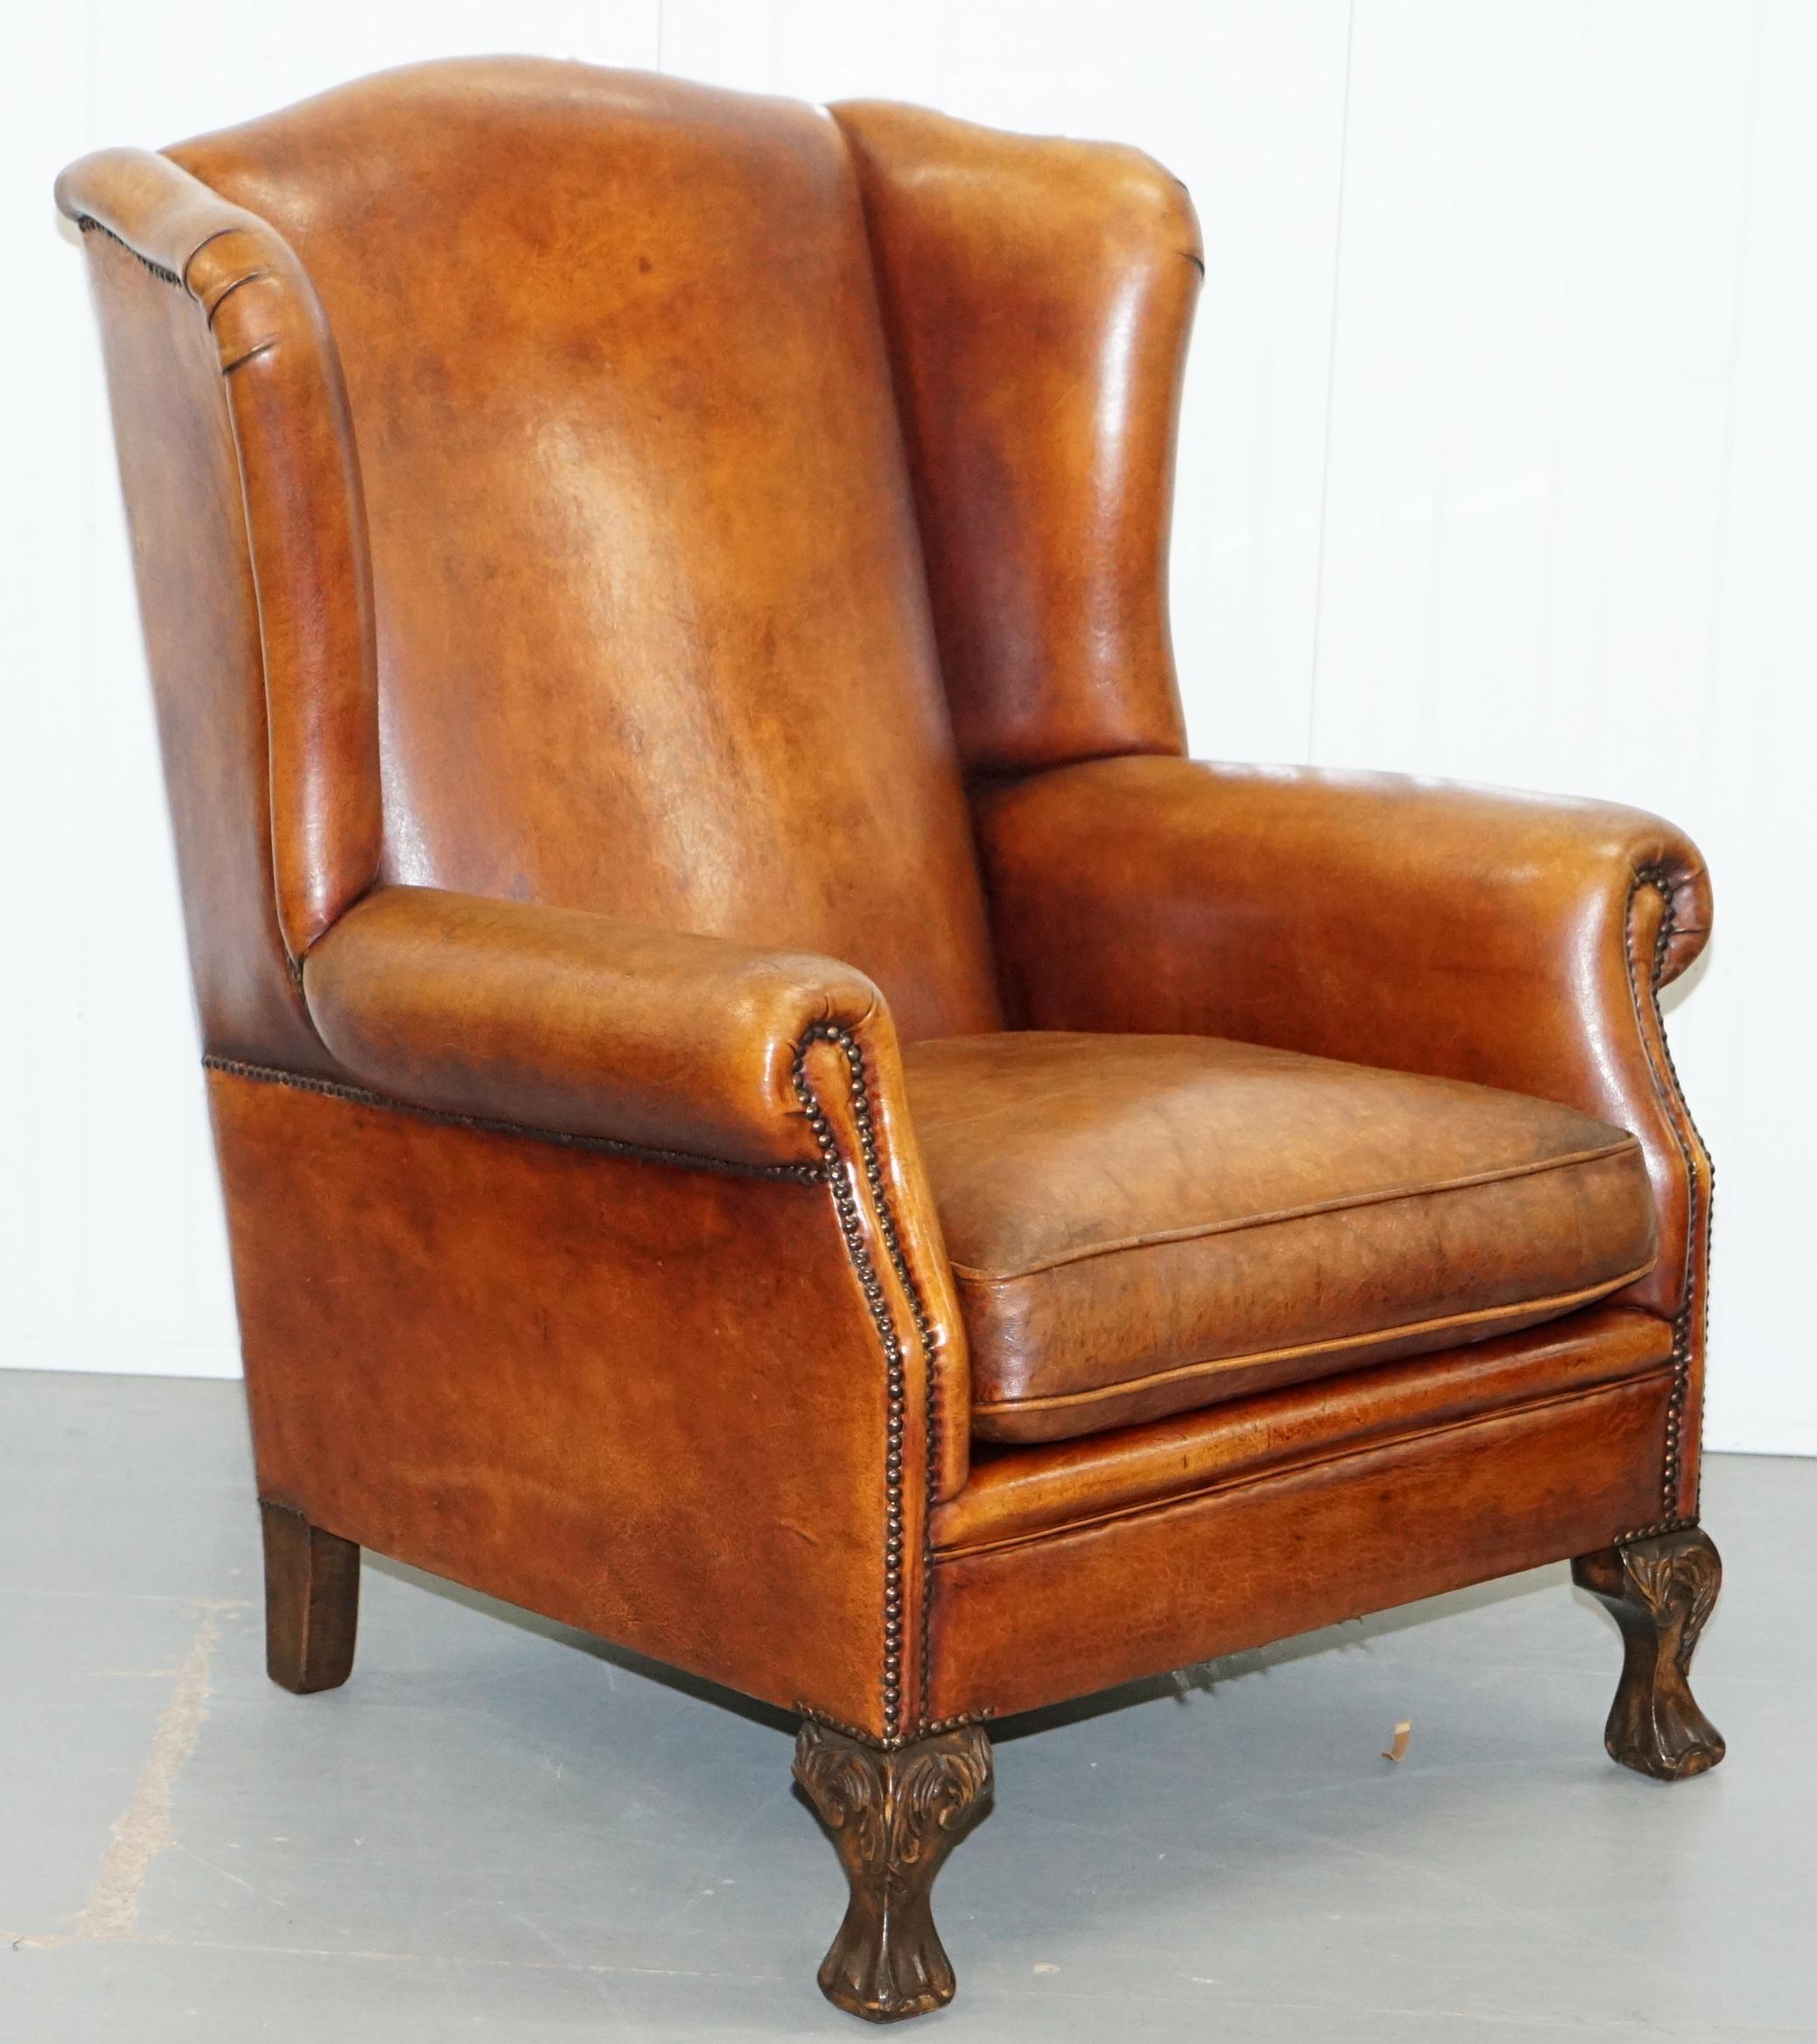 We are delighted to offer for sale this stunning pair of vintage Sheepskin whiskey brown leather wingback armchairs

Please note the delivery fee listed is just a guide, it covers within the M25 only, for an accurate quote please send me your